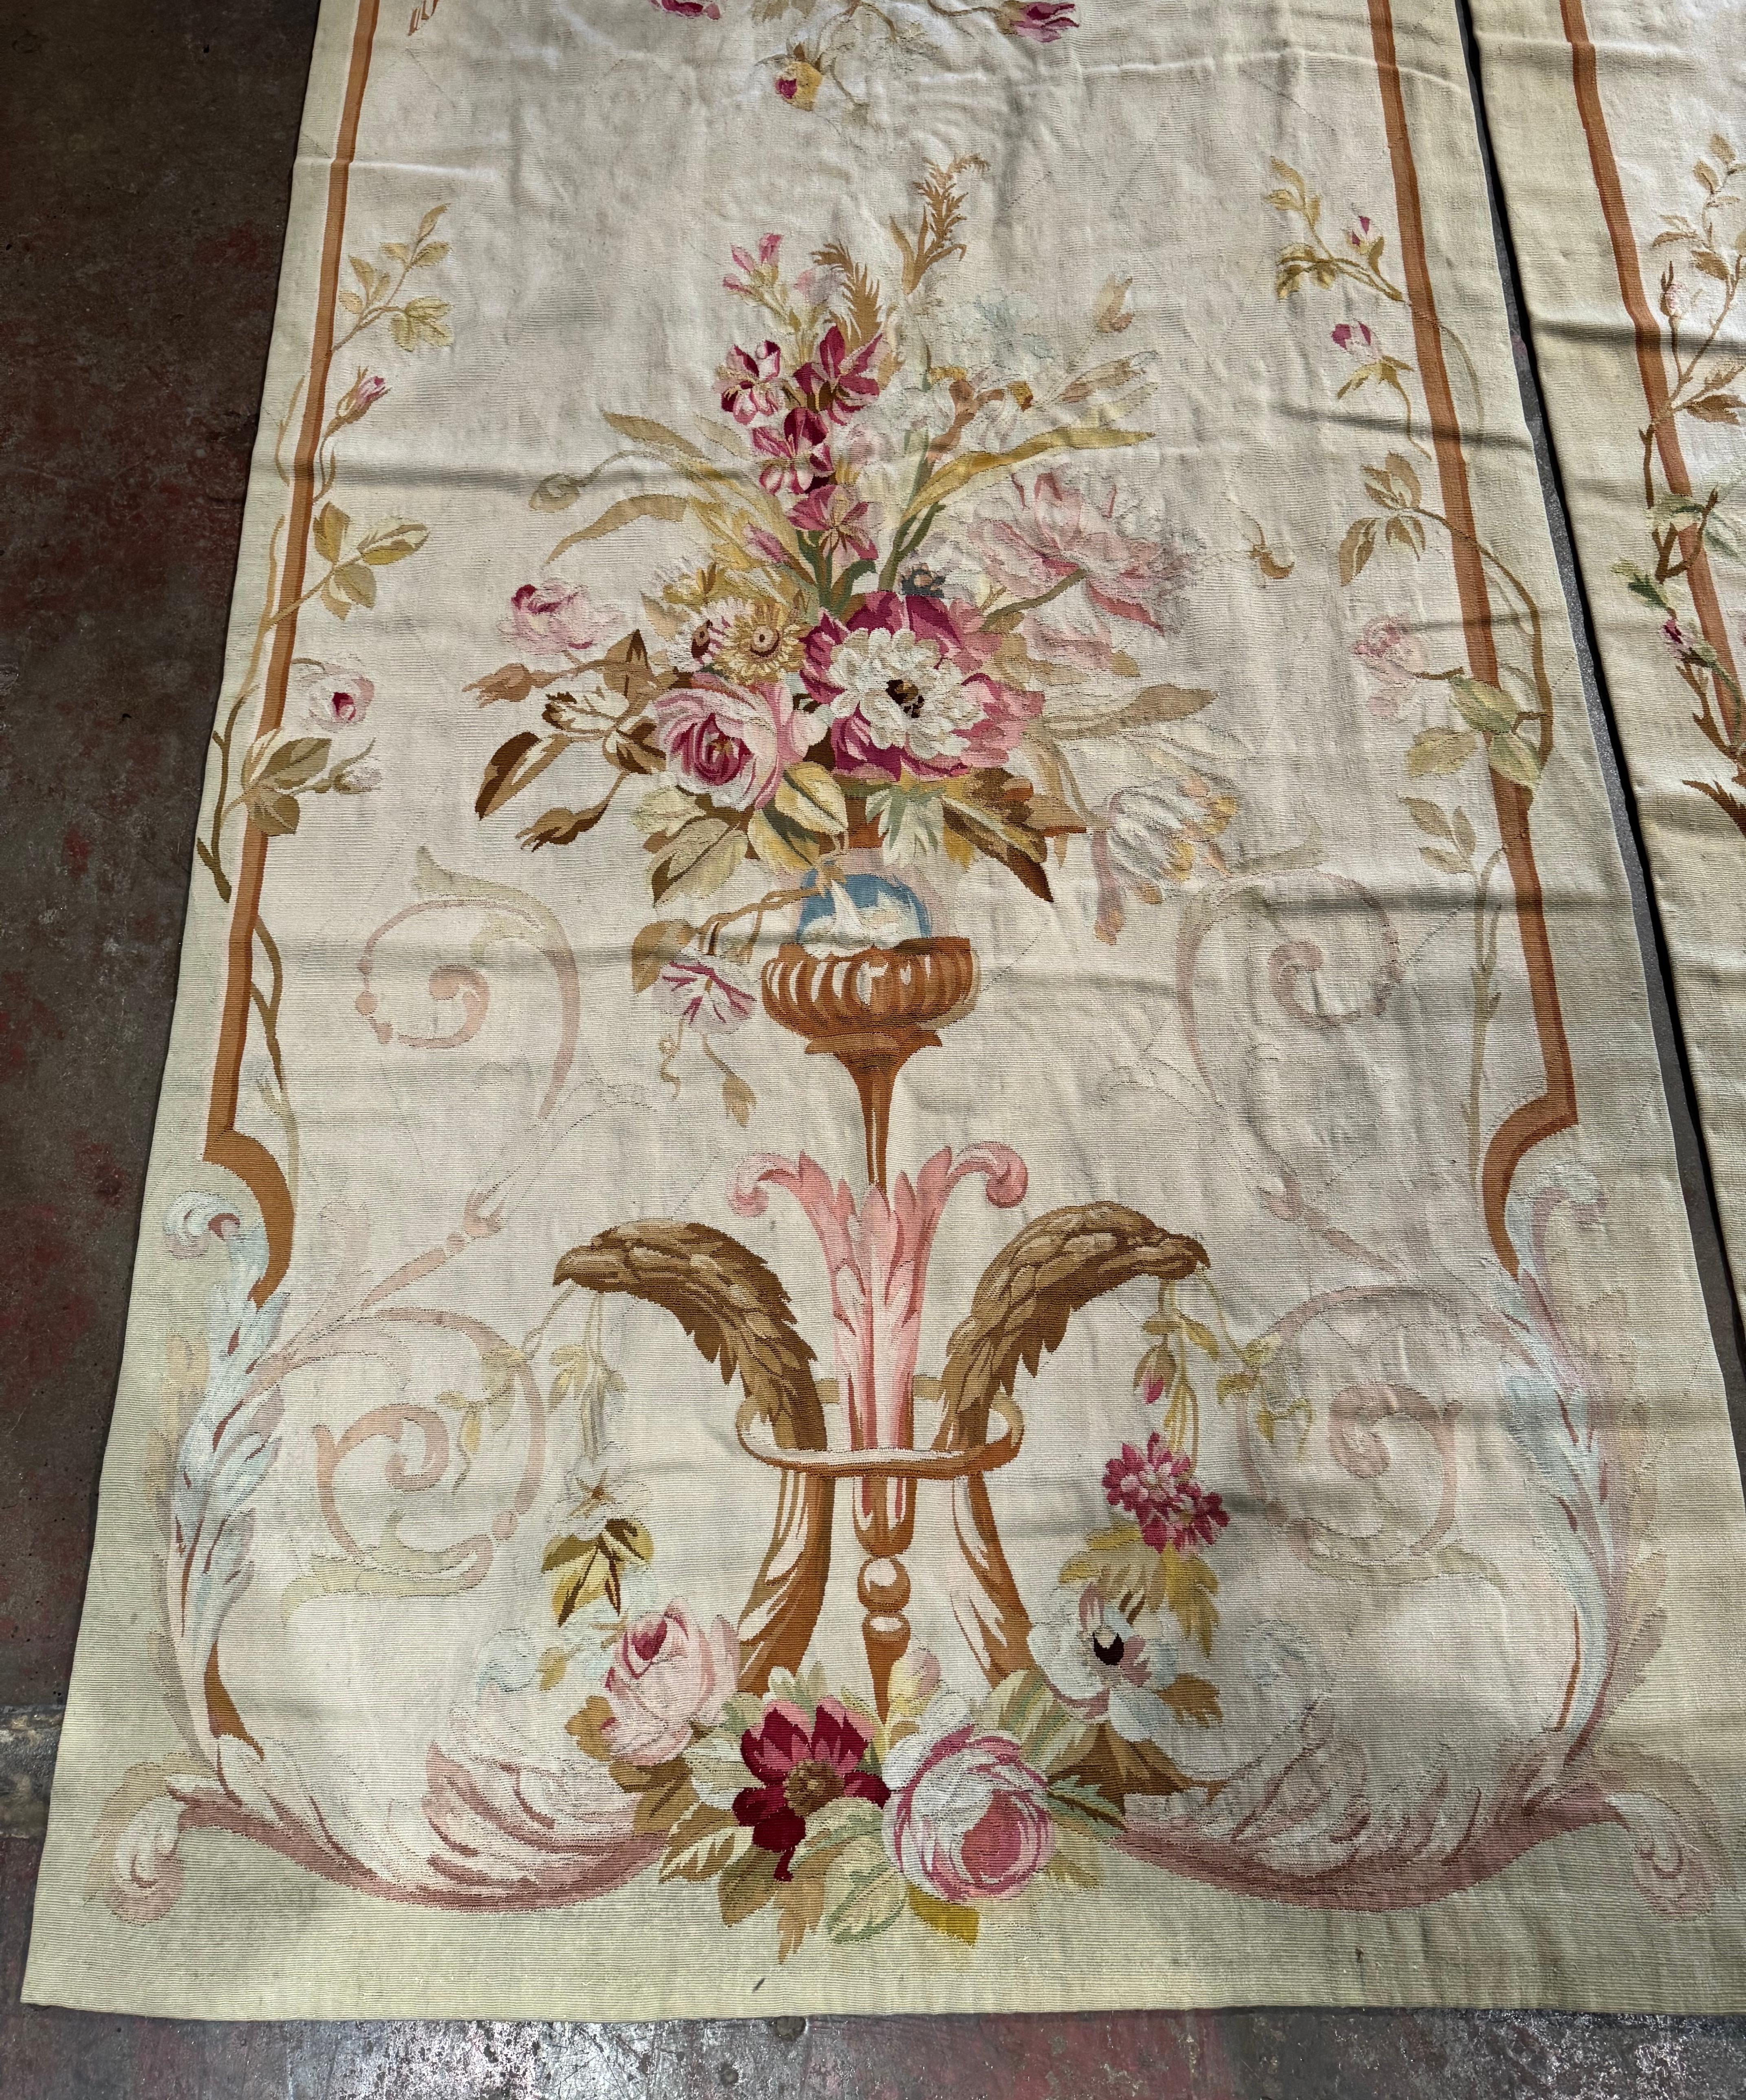 Pair of Mid-19th Century French Handwoven Floral Aubusson Wall Hanging Portieres In Excellent Condition For Sale In Dallas, TX